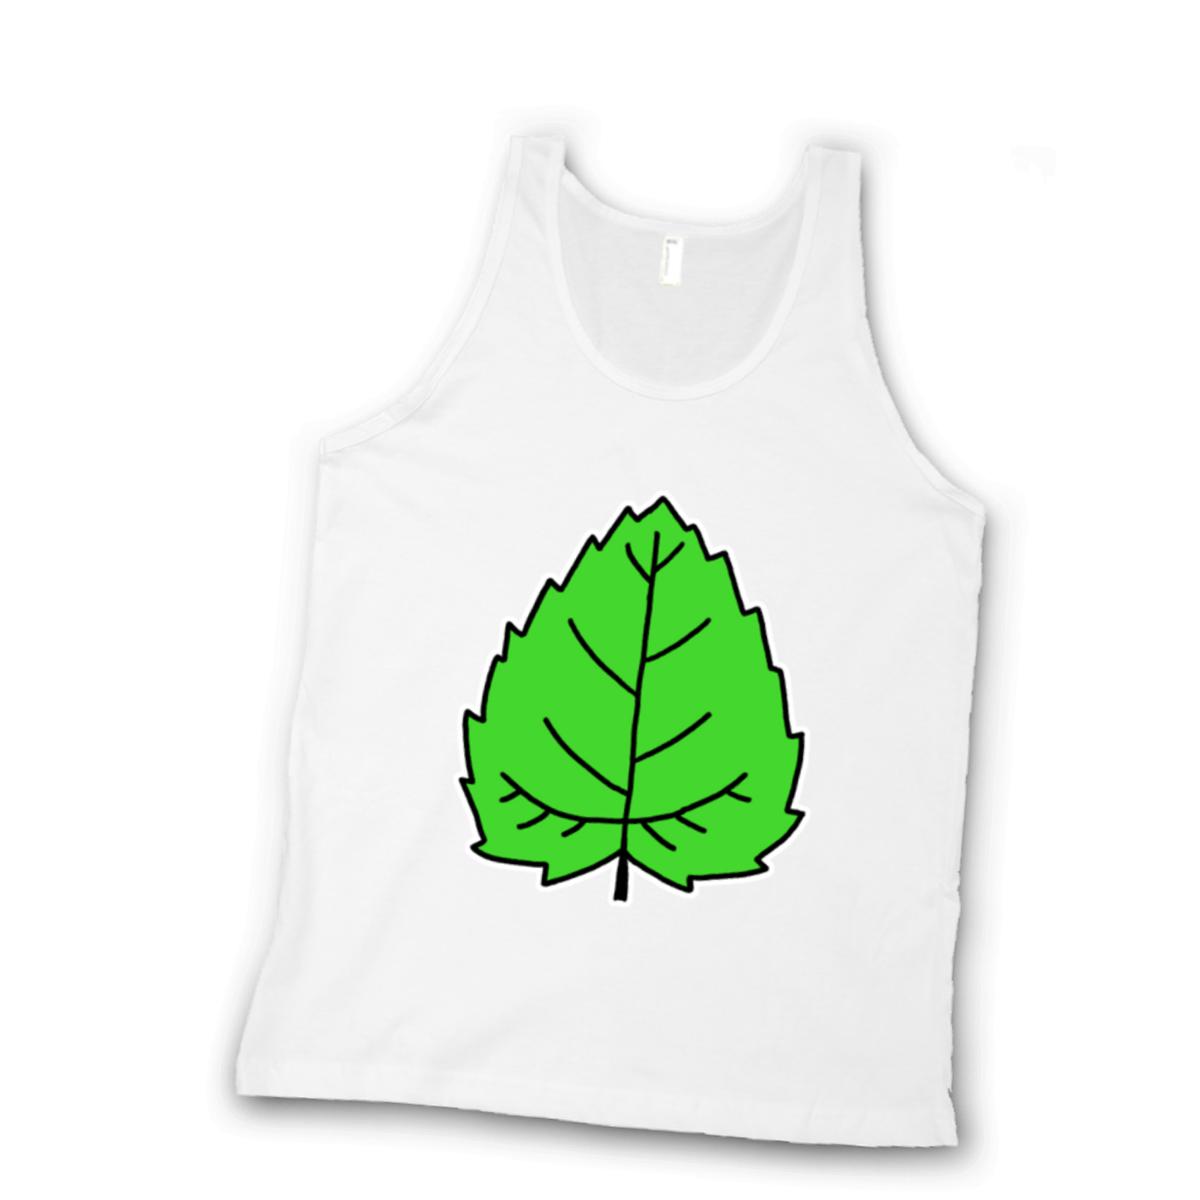 Mulberry Leaf Unisex Tank Top Small white